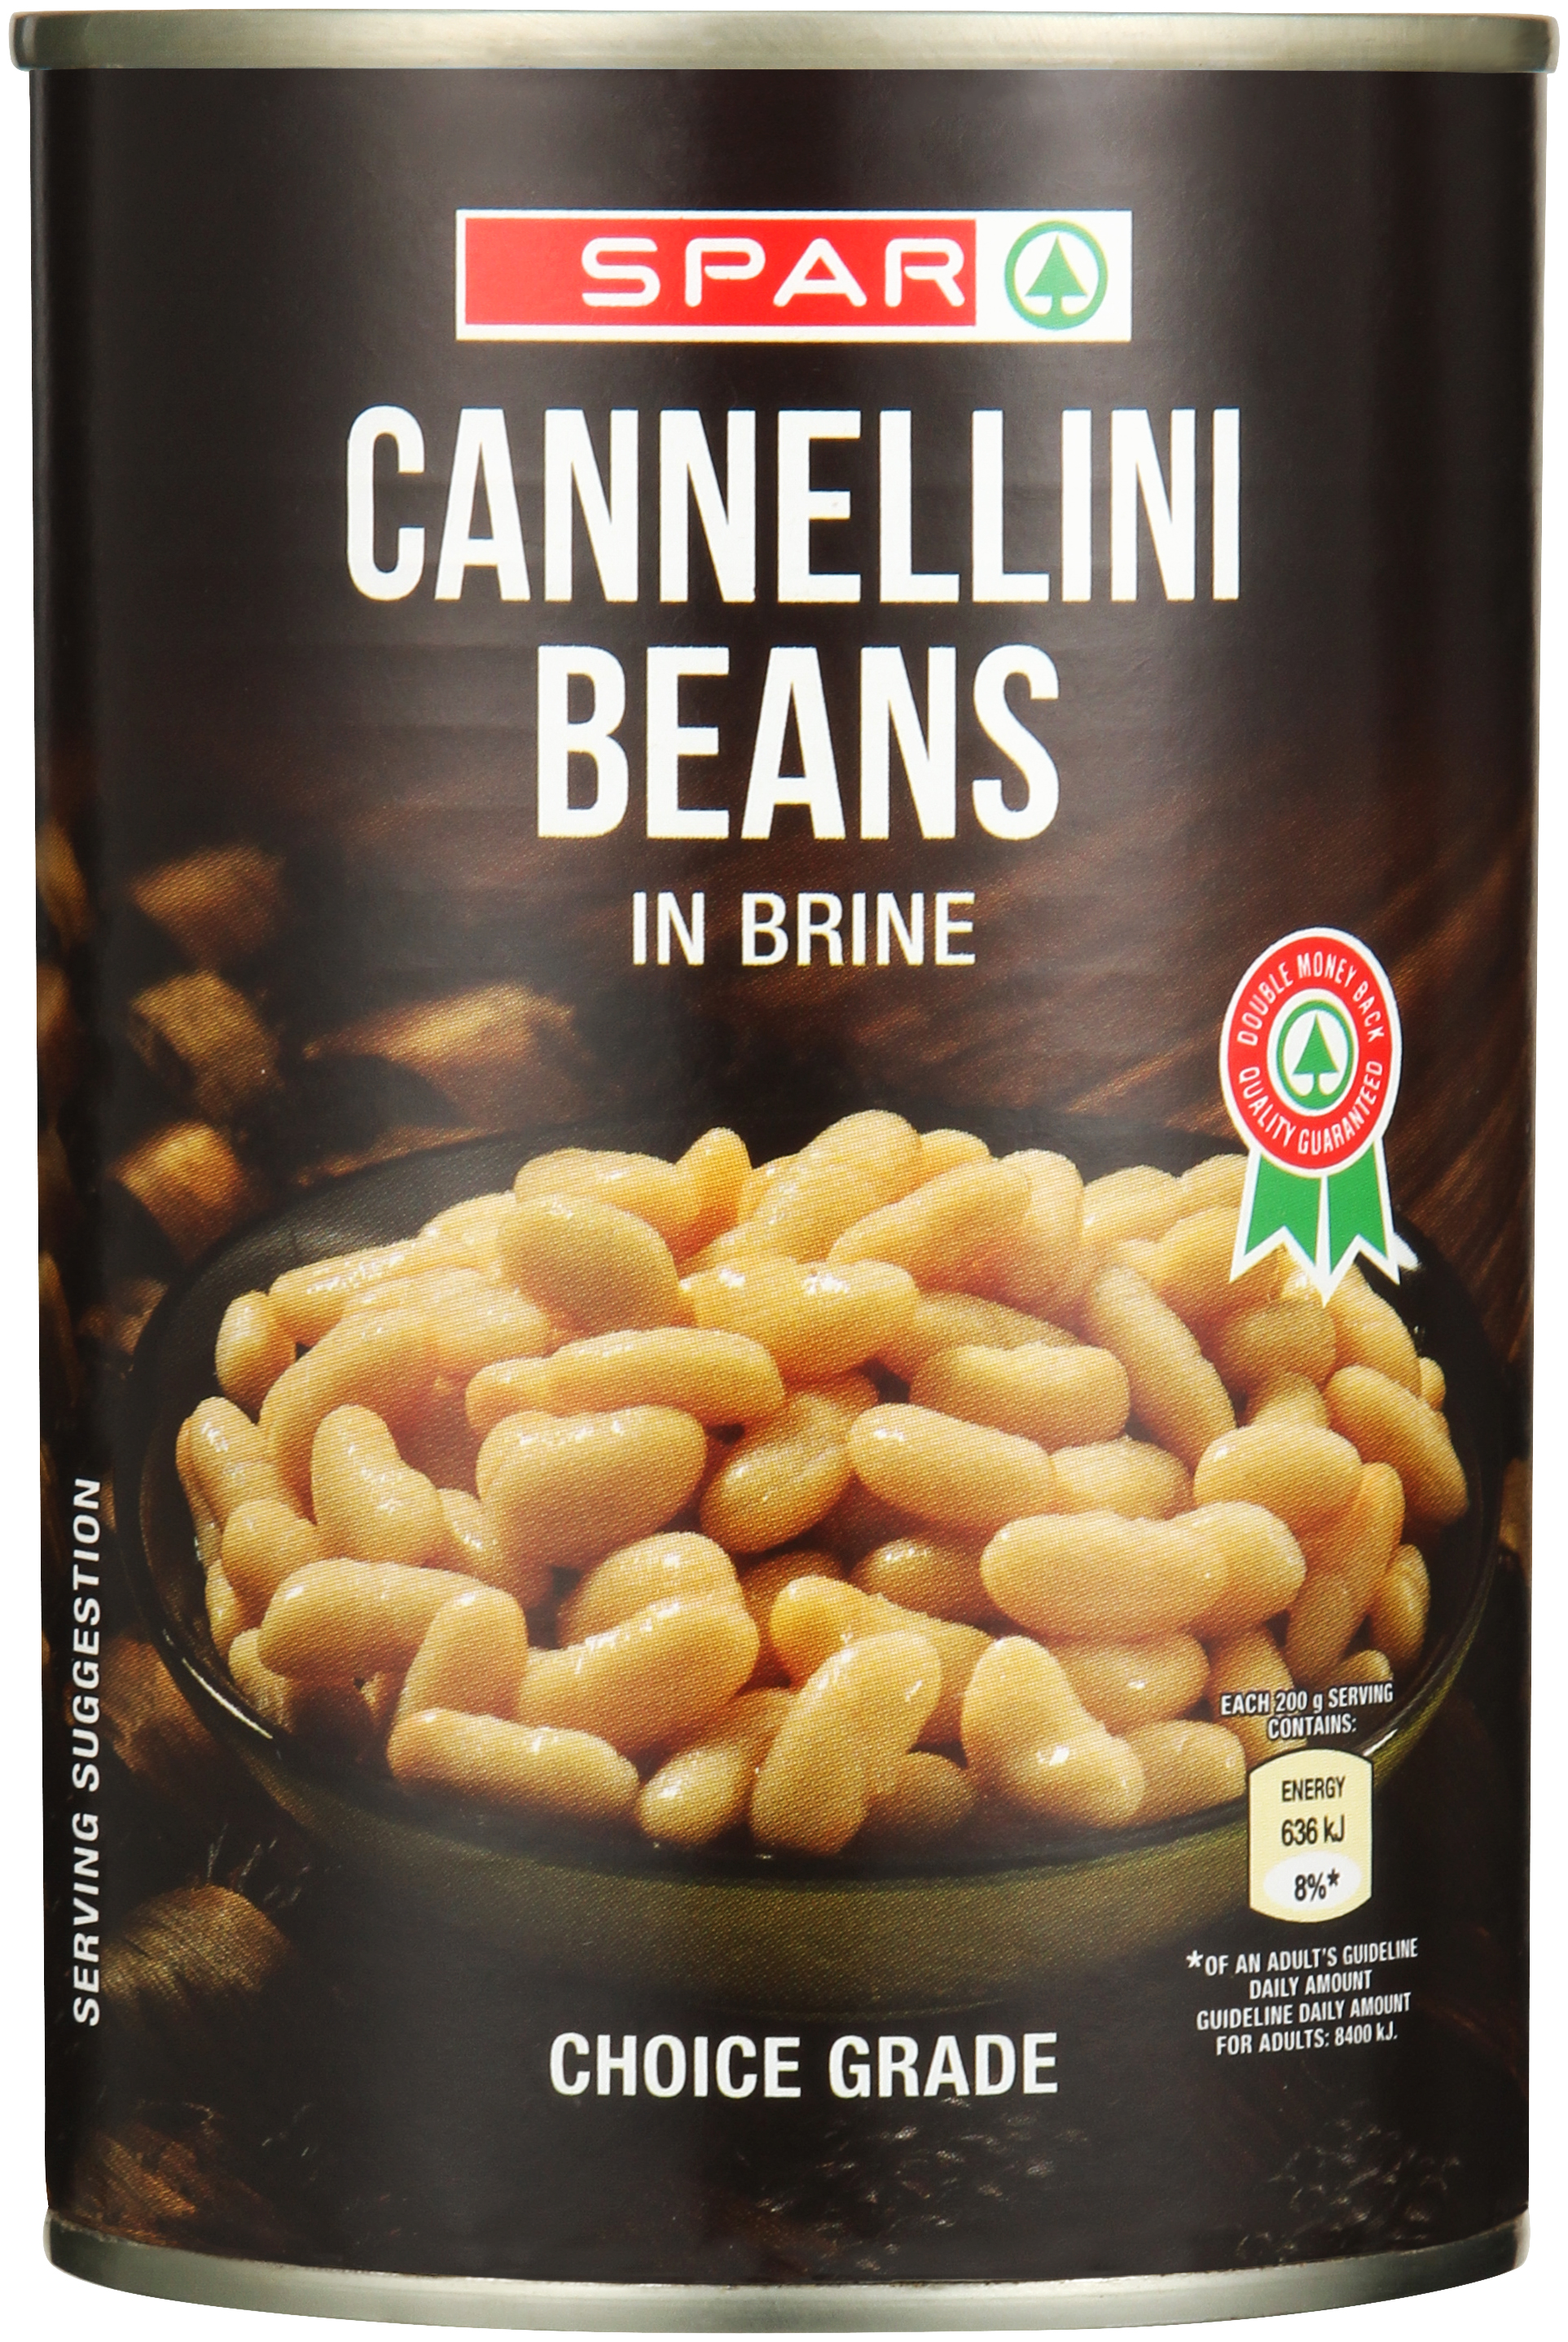 cannellini beans in brine